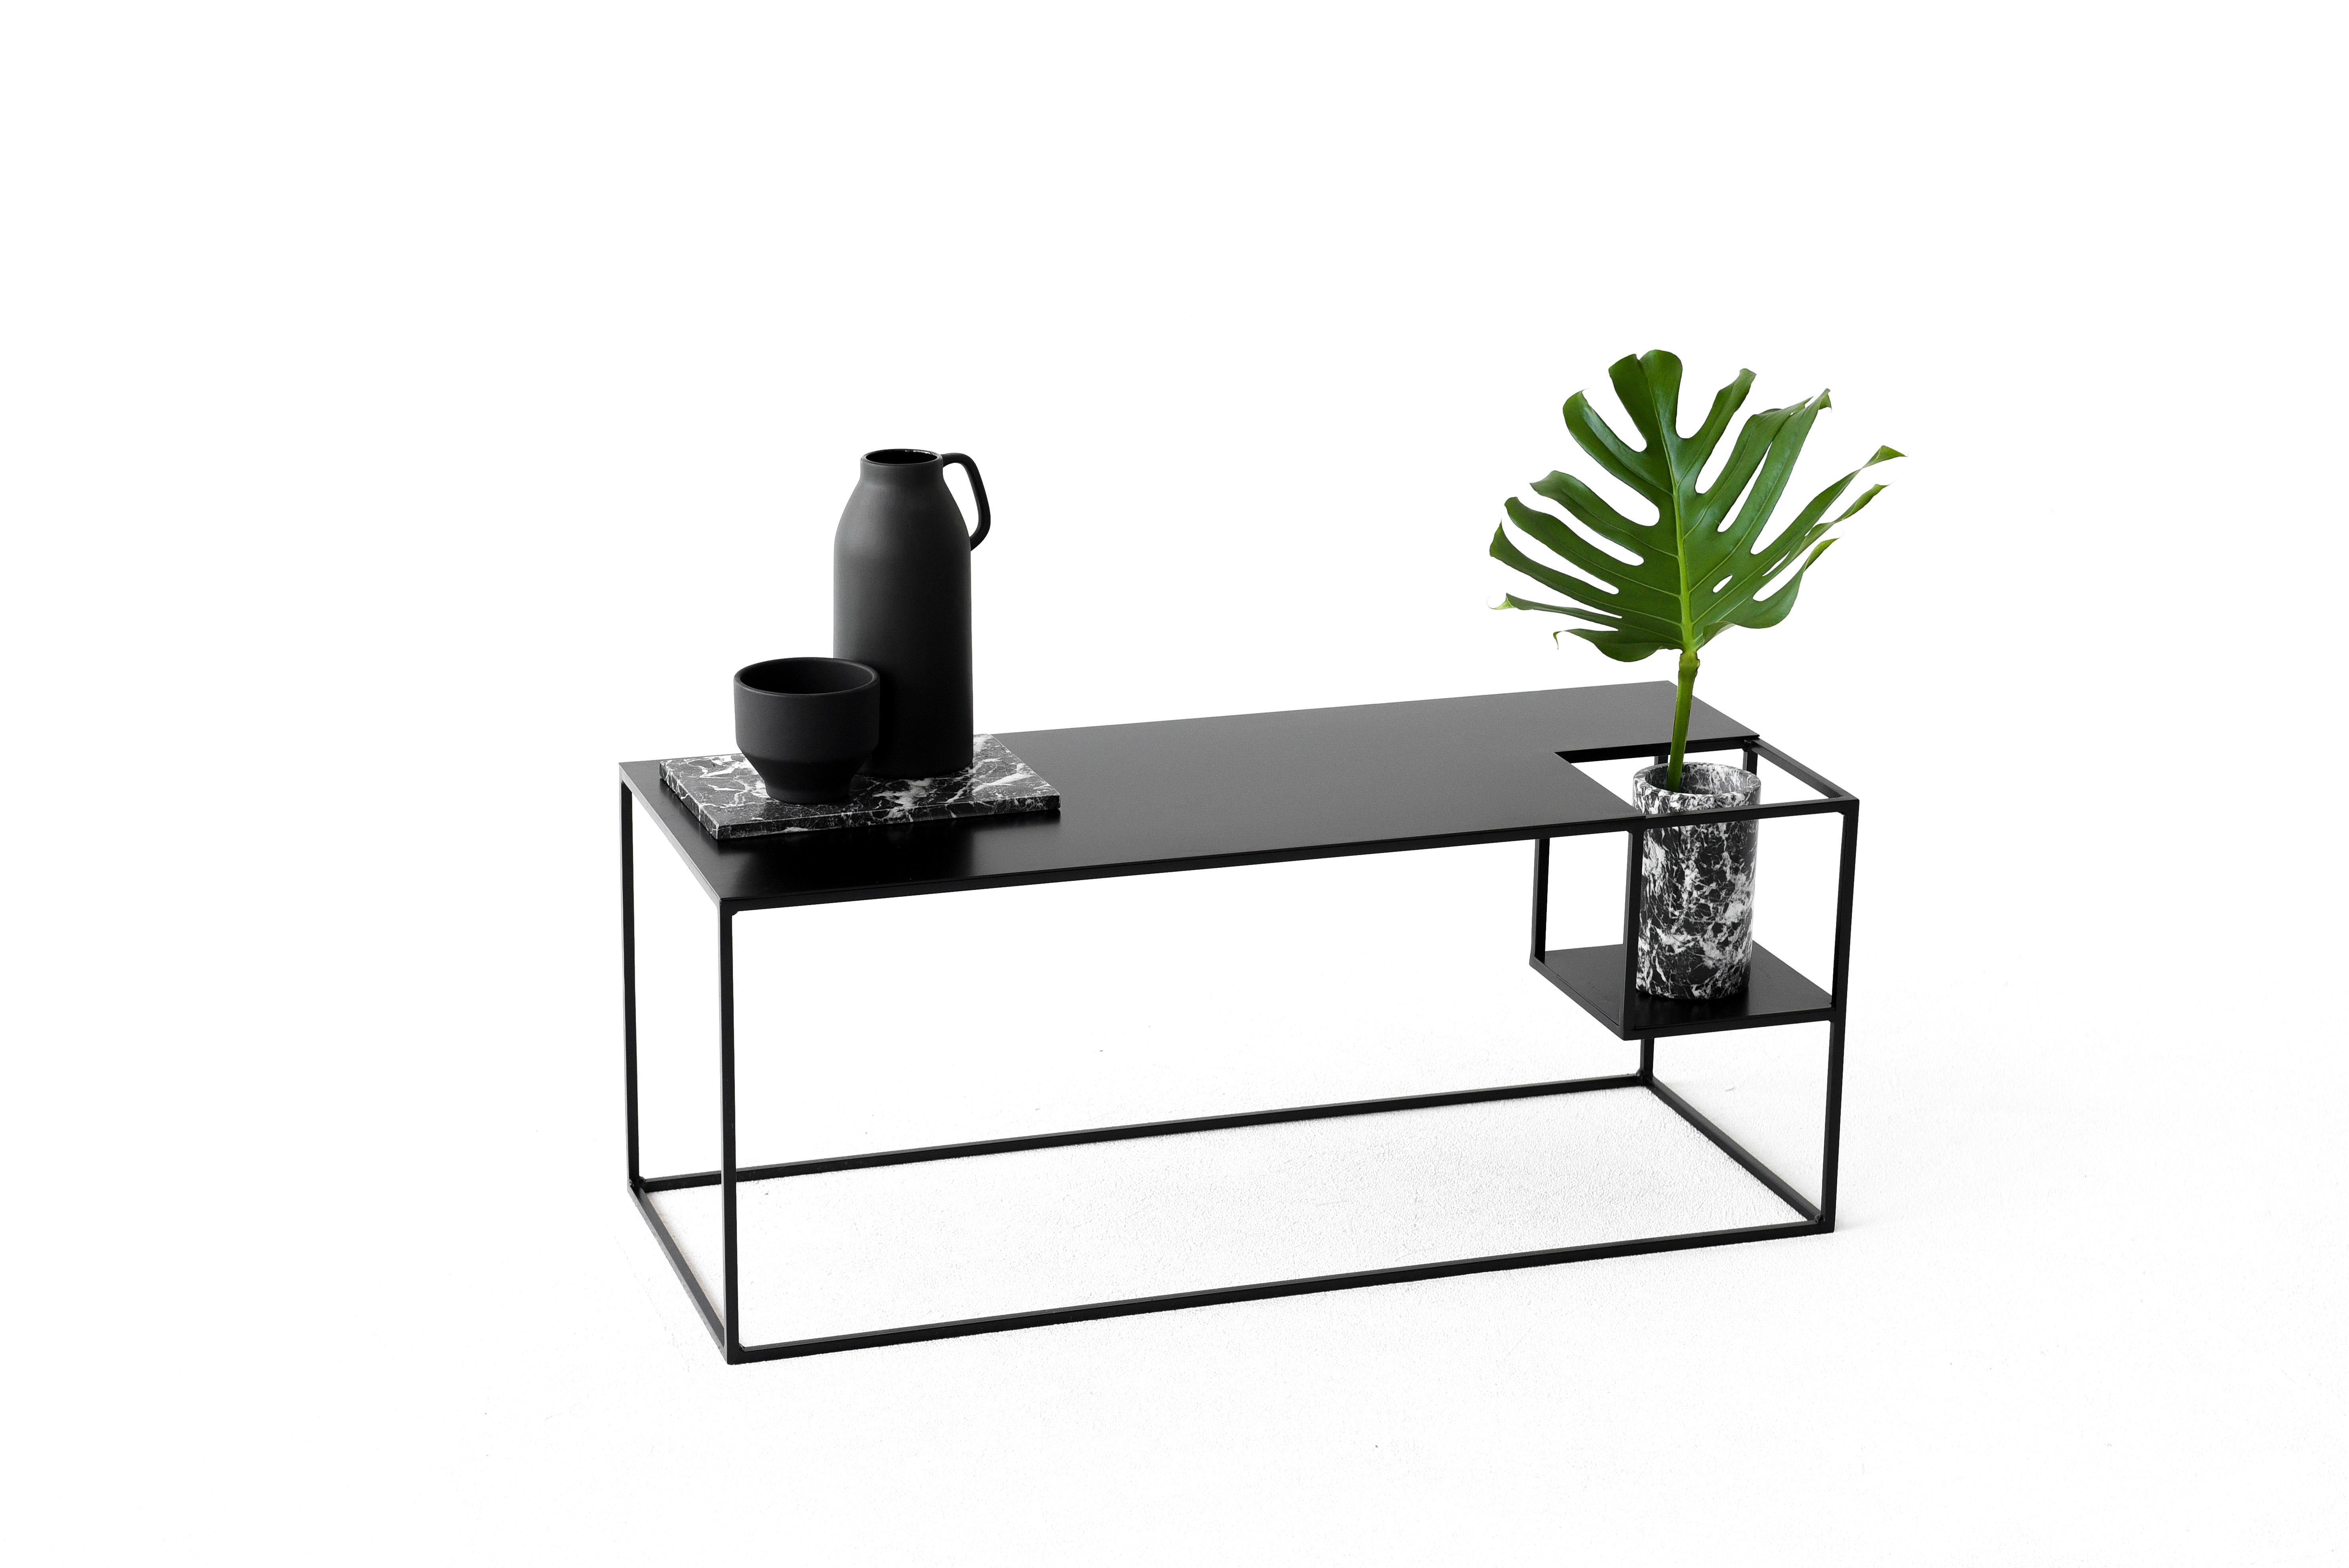 Object 007 Console Table by NG Design
Dimensions: D100 x W40 x H40 cm
Materials: Powder coated steel.

Also Available: All of objects available in different materials and colors on demand.

Your beloved plant has just found the perfect place